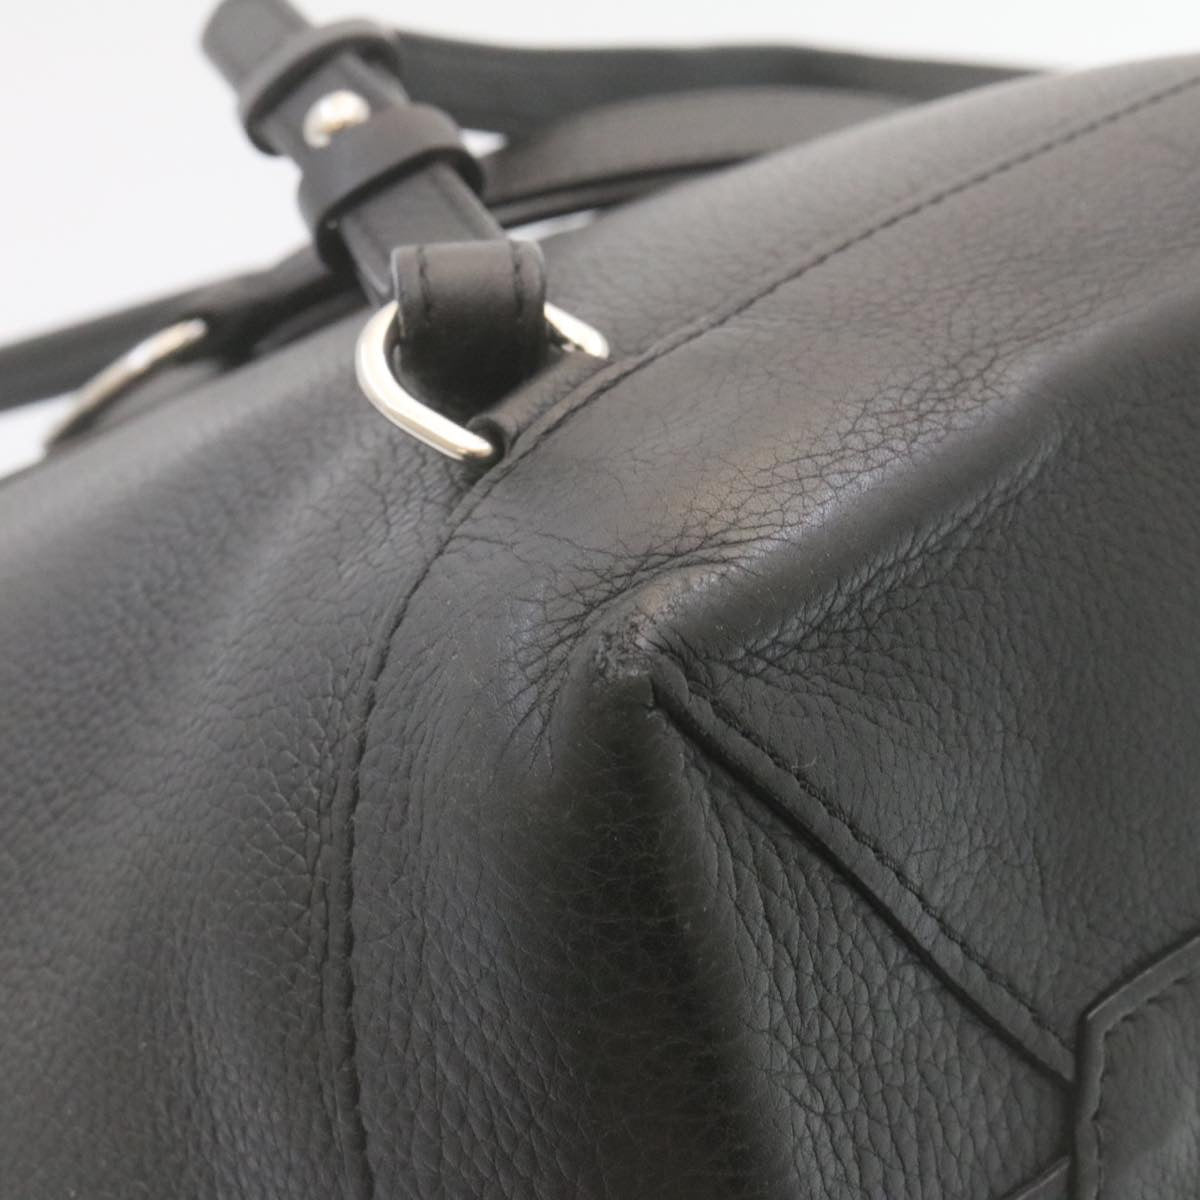 LOUIS VUITTON Calfskin Leather Turn Lock Rock Me Backpack Black M41815 Auth bs536A